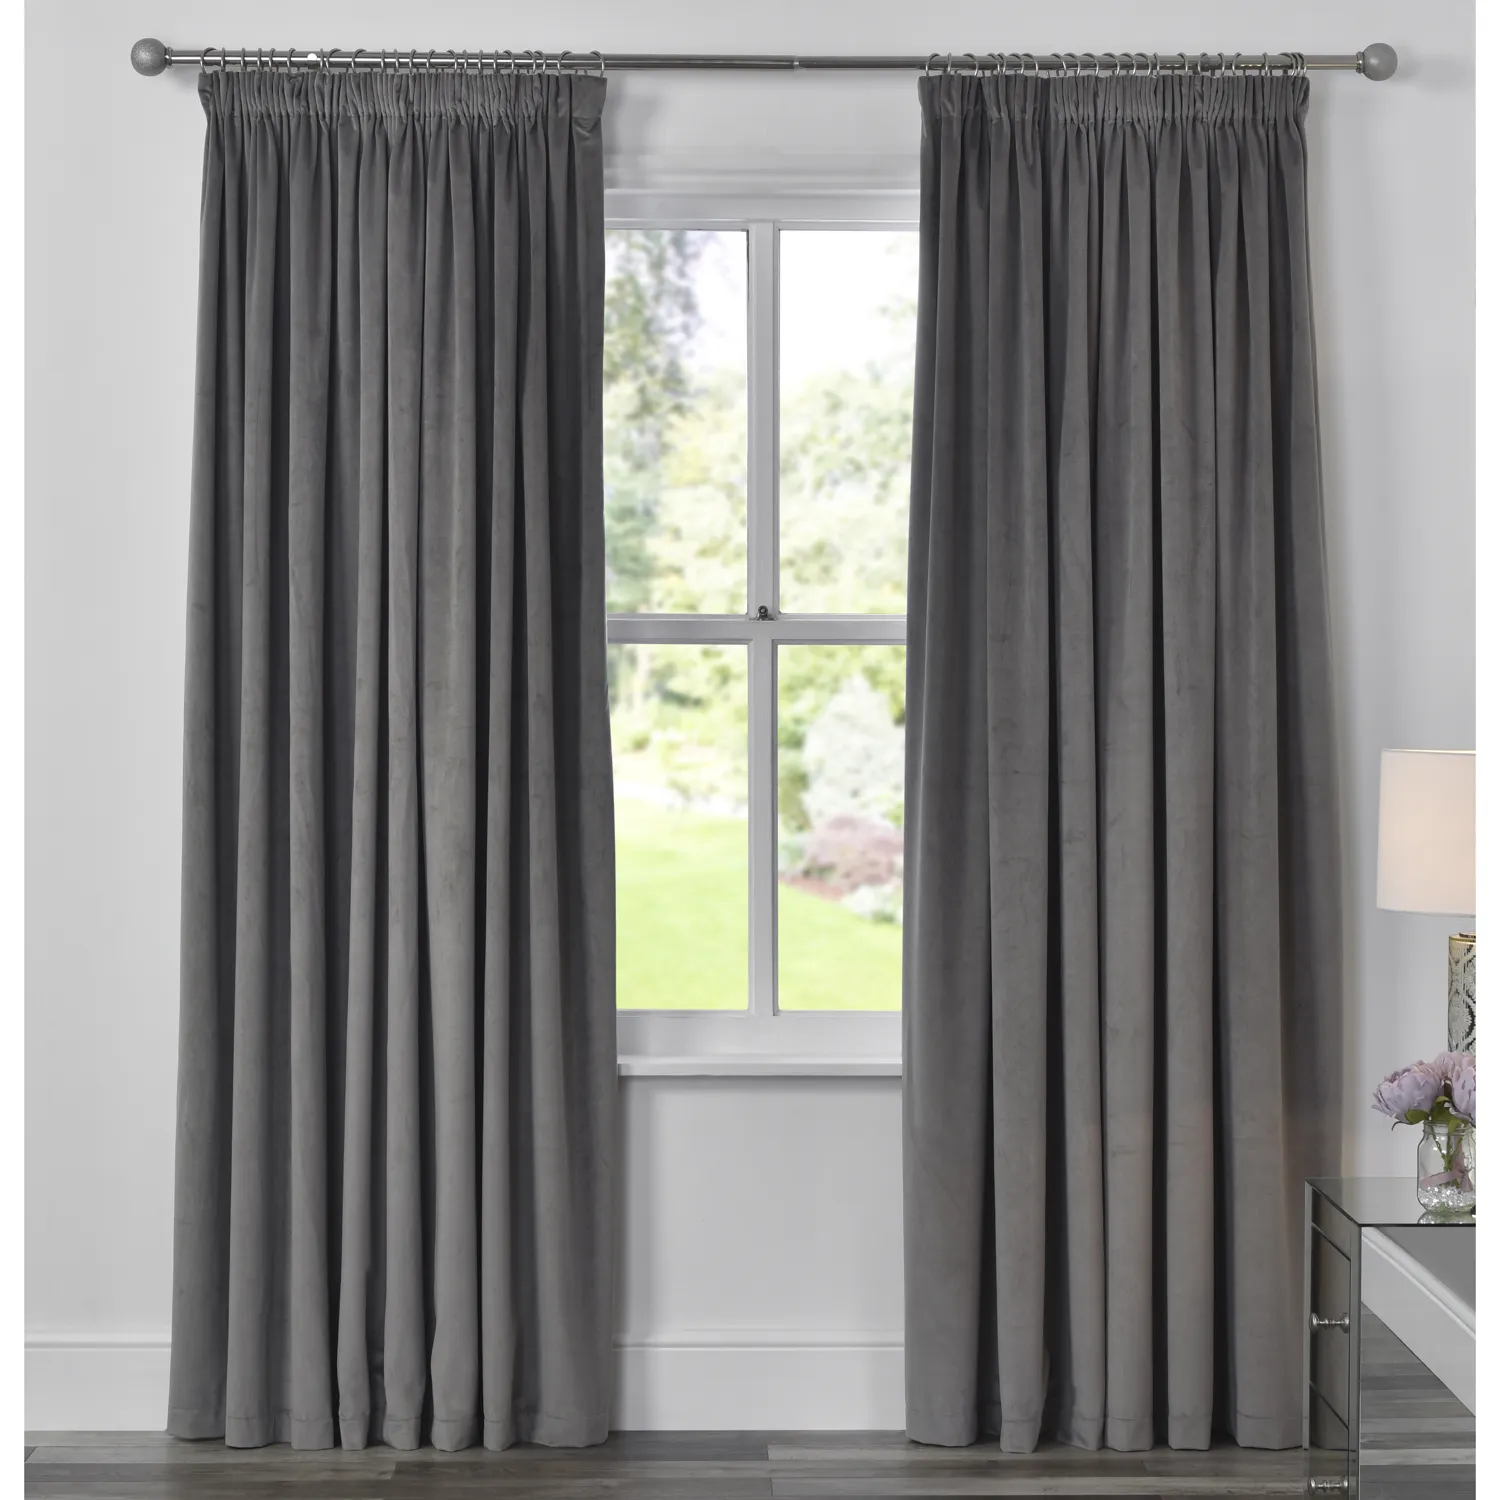 Luxury Curtain Blackout Hotel Living Room Blackout Curtain 2 Panel Ready Made Thick Velvet Blackout Curtains in Guangzhou